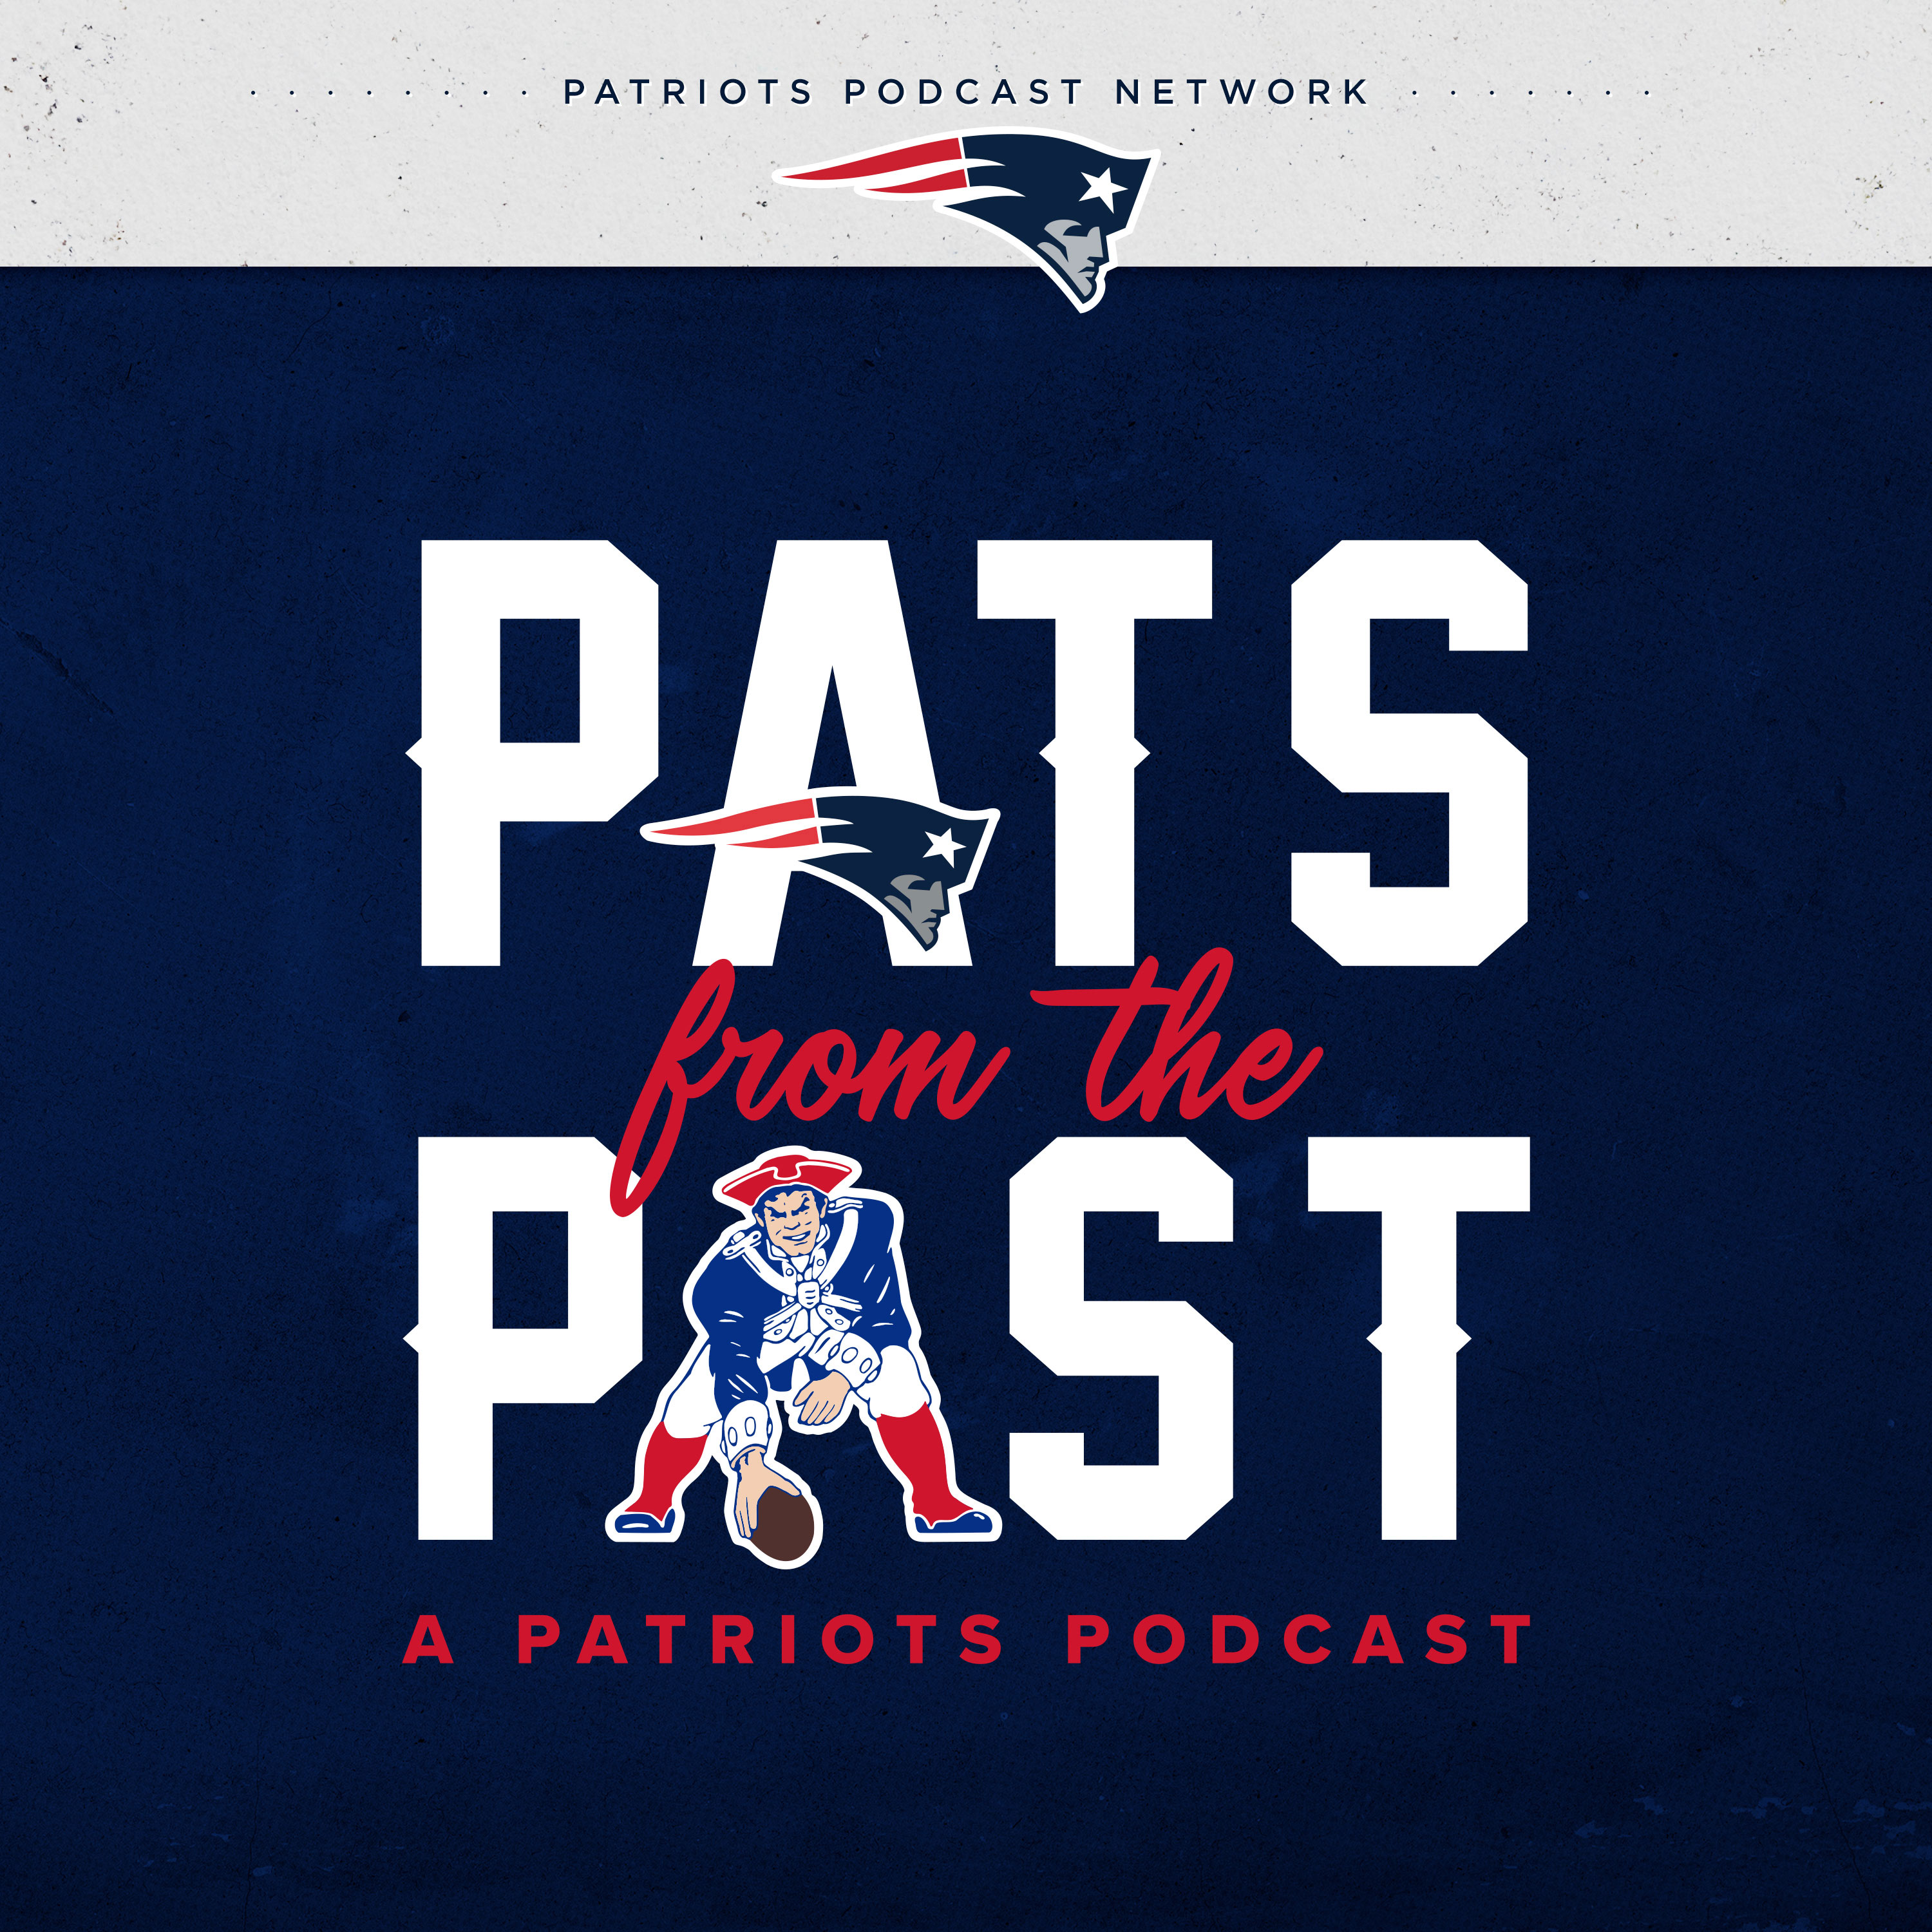 Pats from the Past: Episode 4, Rob Ninkovich